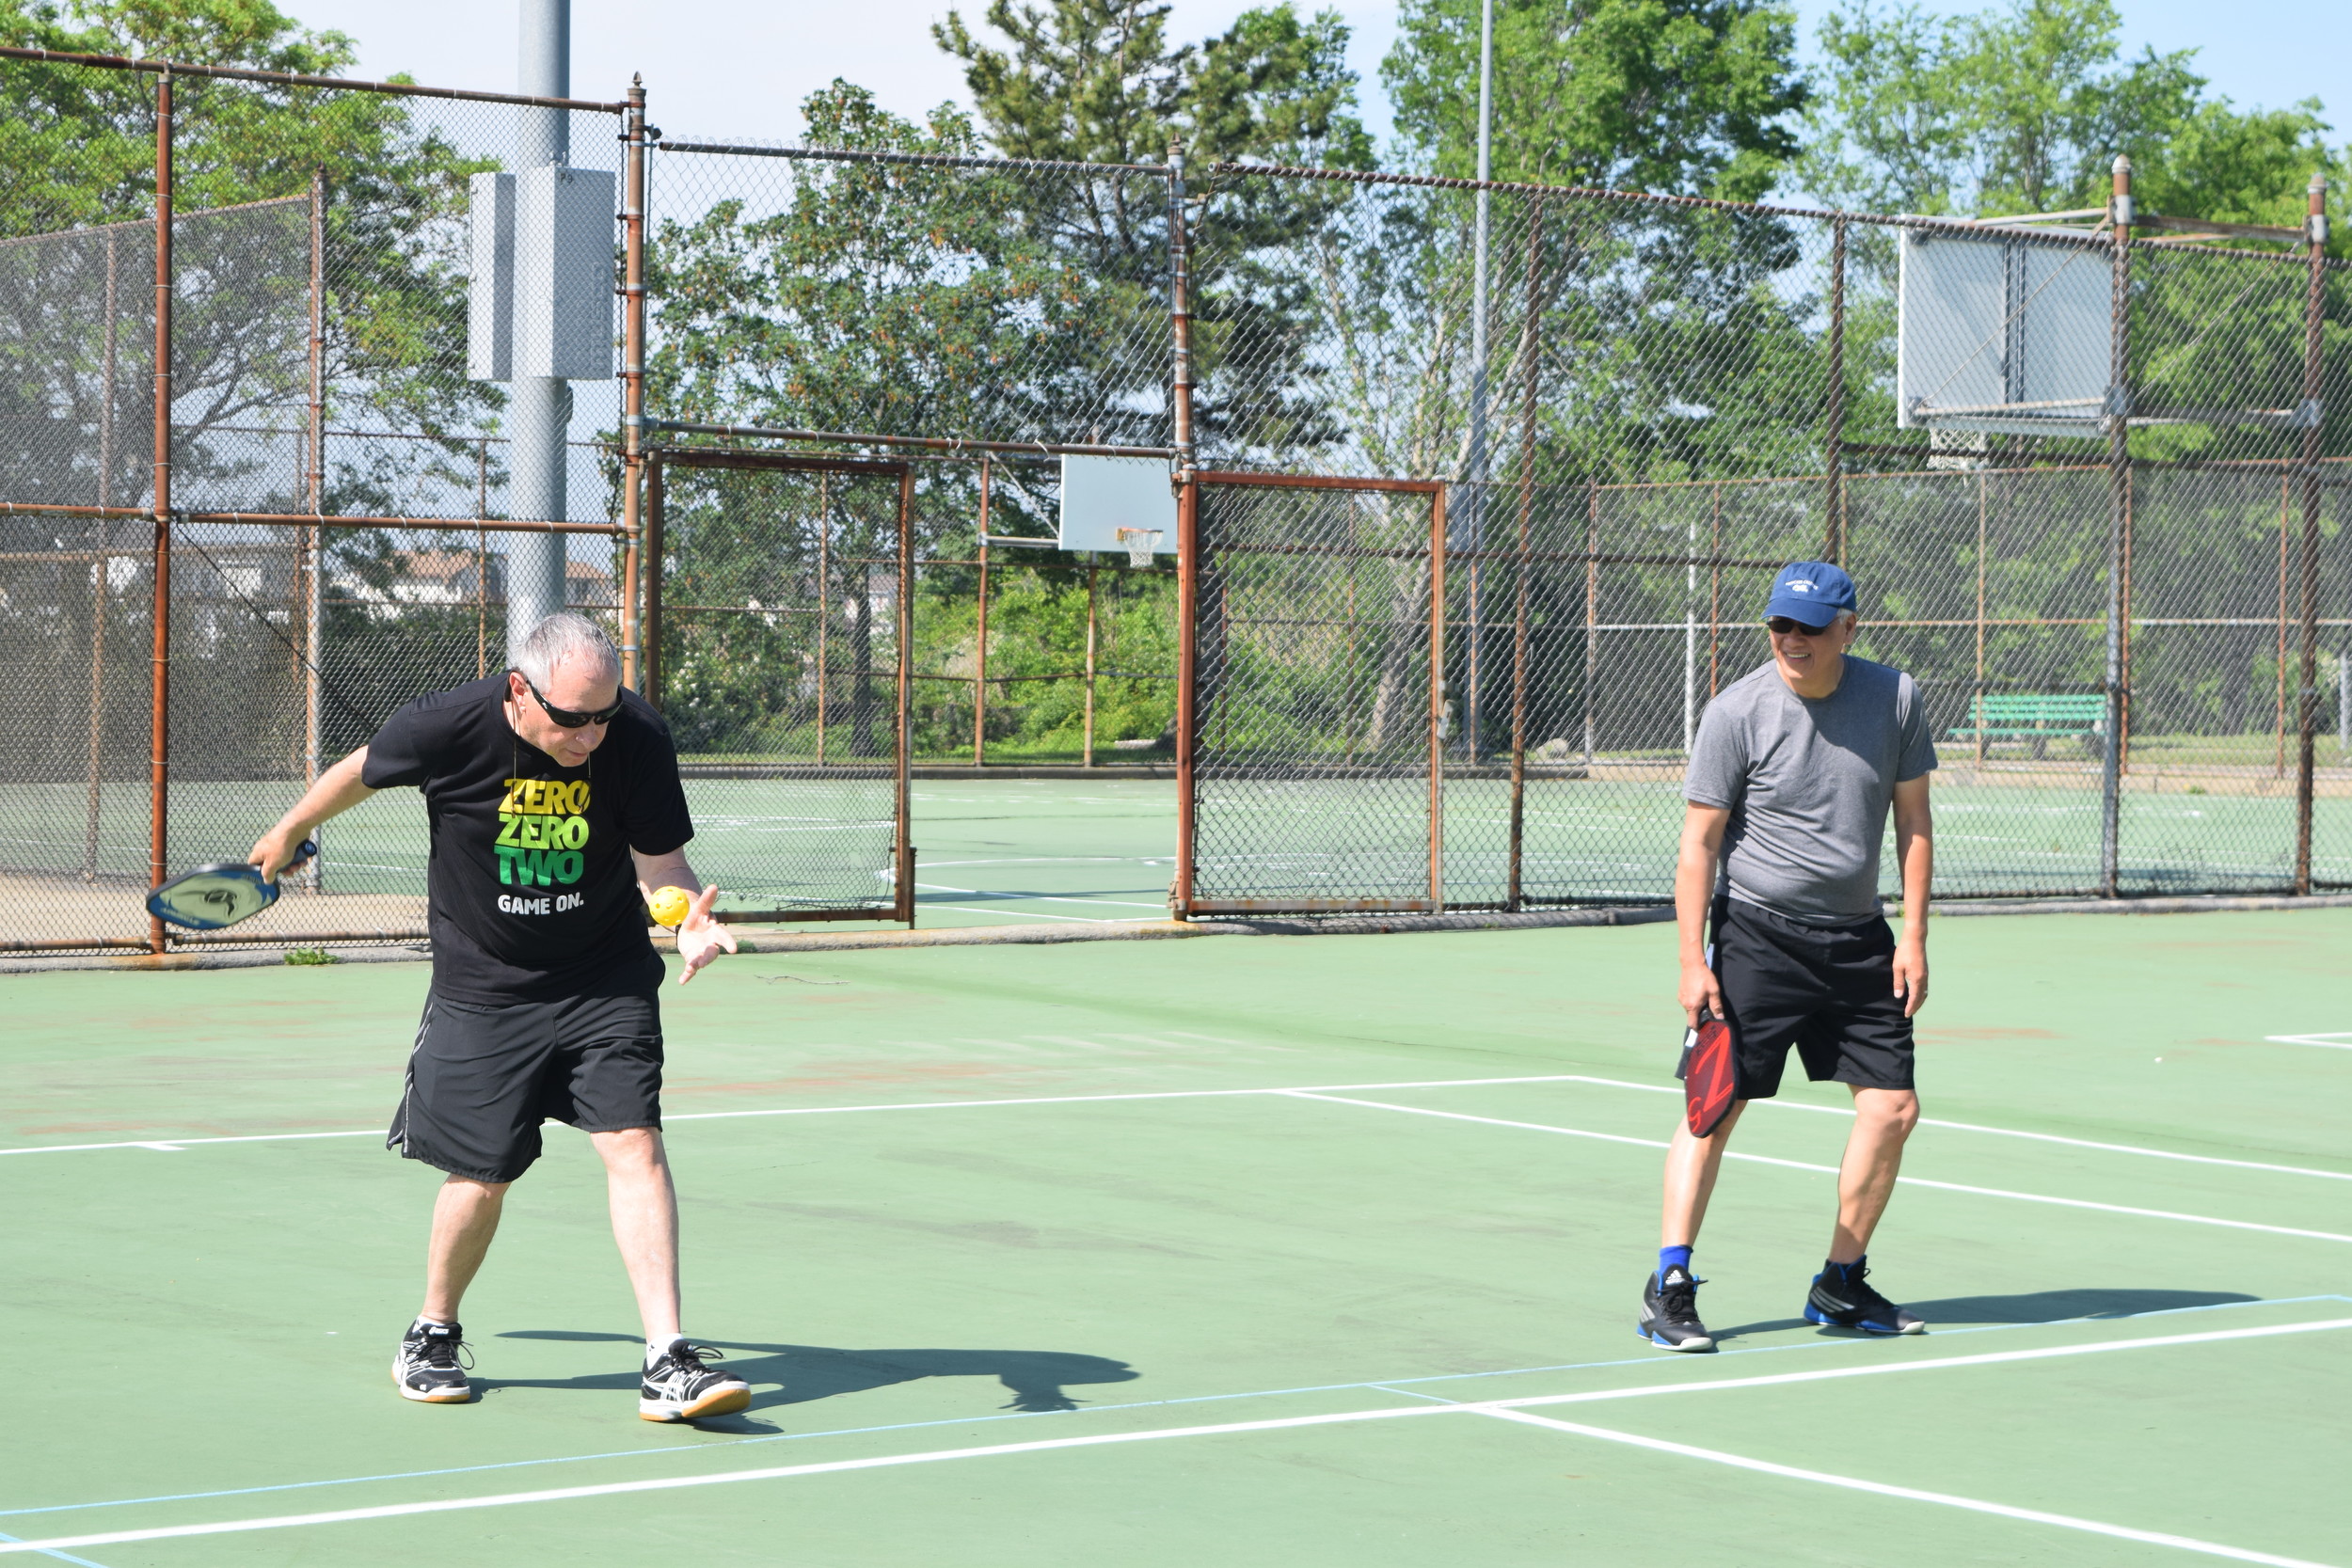 Tony Soohoo, of Merrick, and Steven Schwartz, of Bellmore, played together as a doubles team.